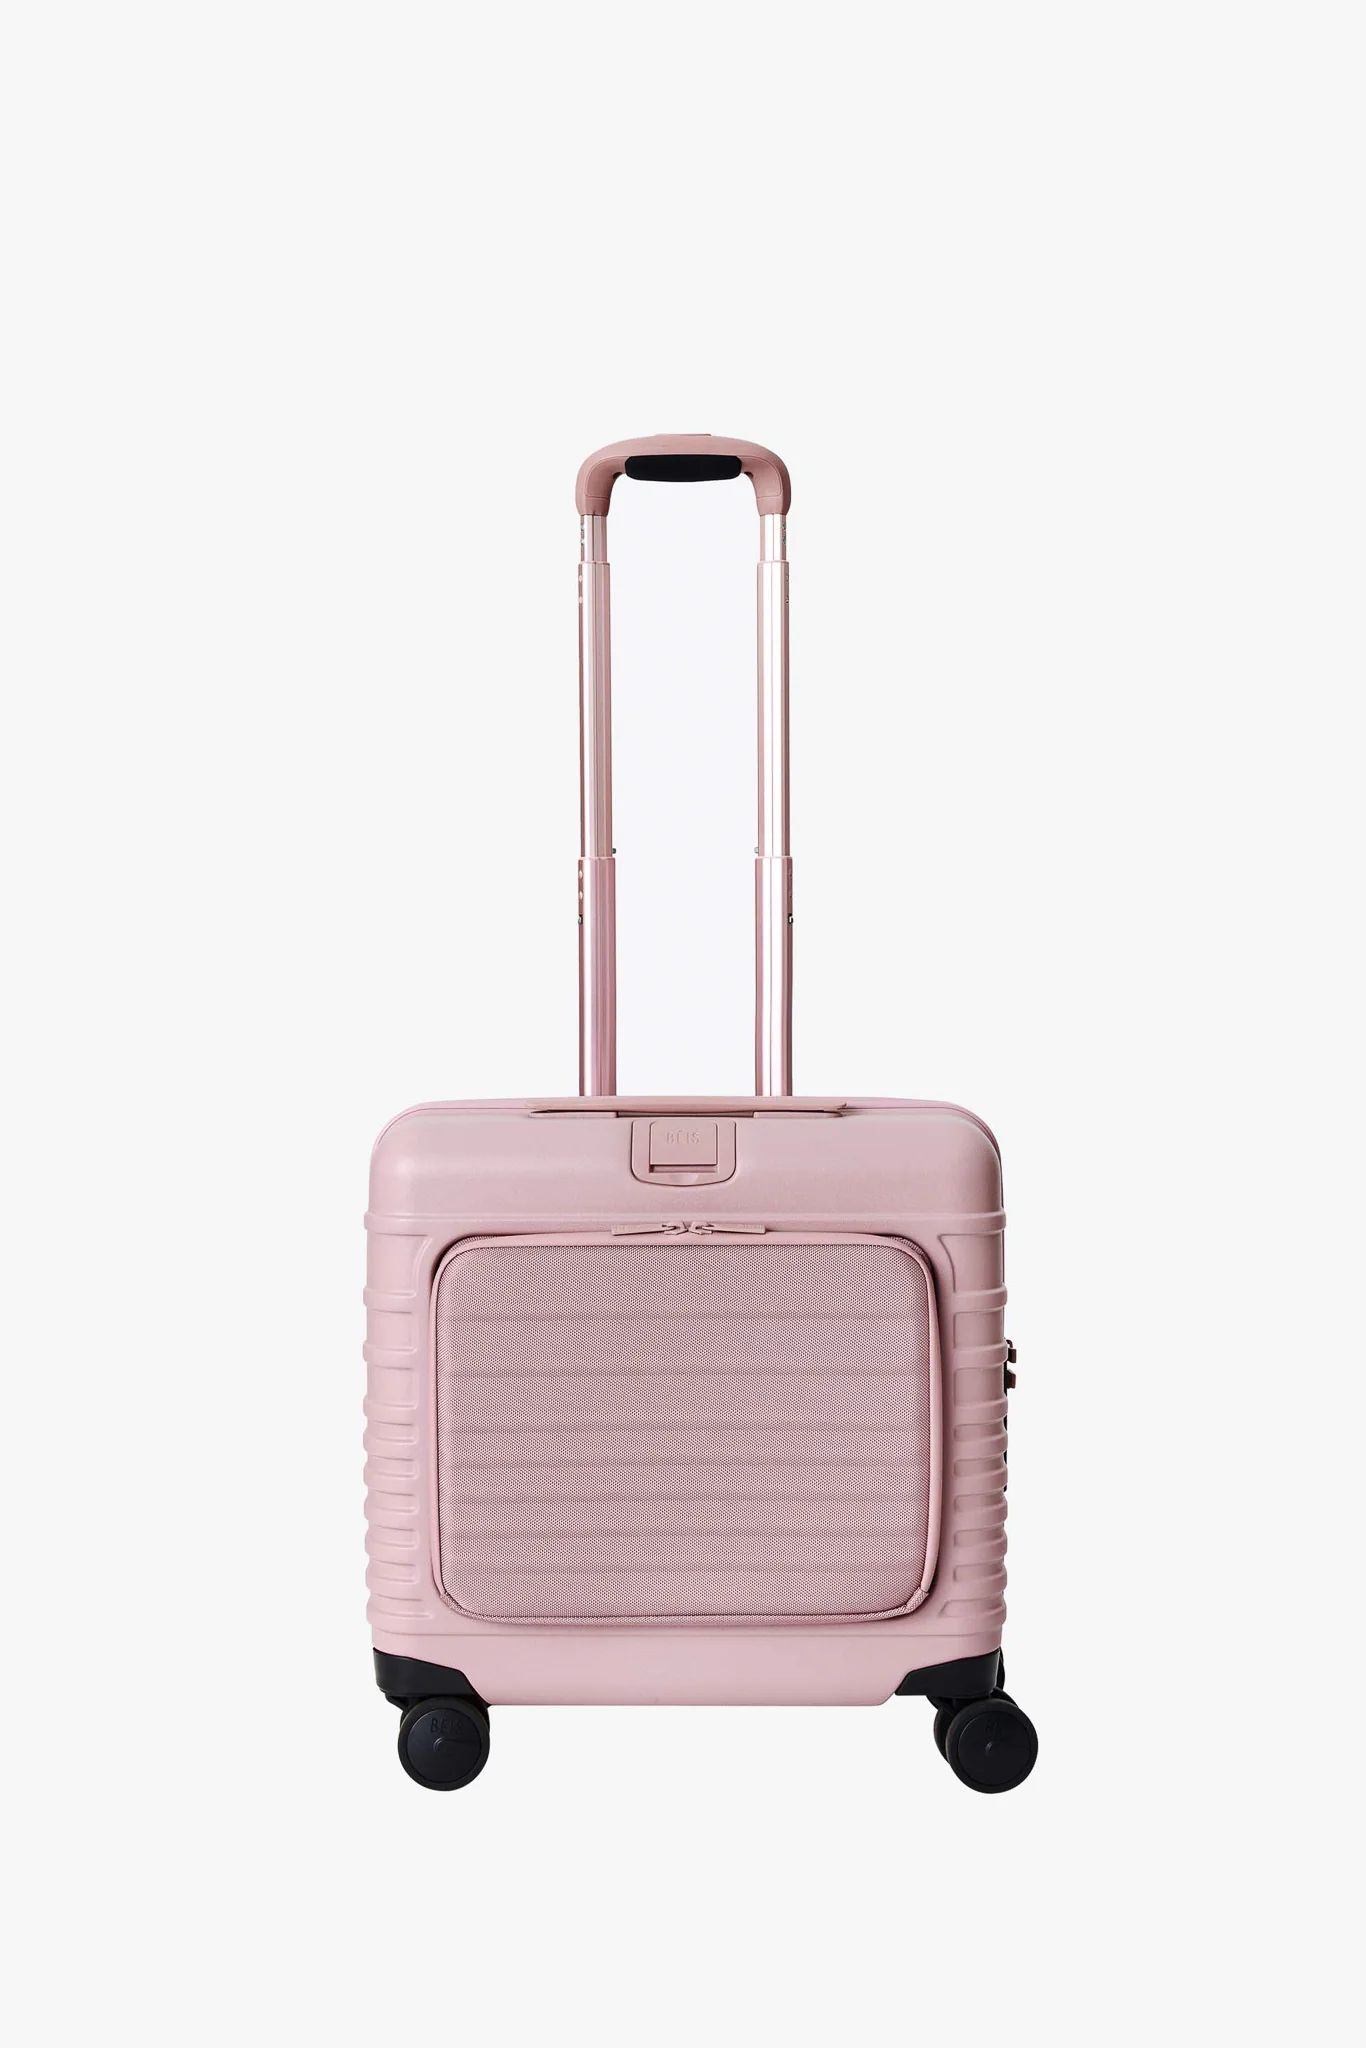 BÉIS 'The Mini Roller' in Atlas Pink - Kids Suitcases & Rolling Carry-On Luggage in Pink | BÉIS Travel